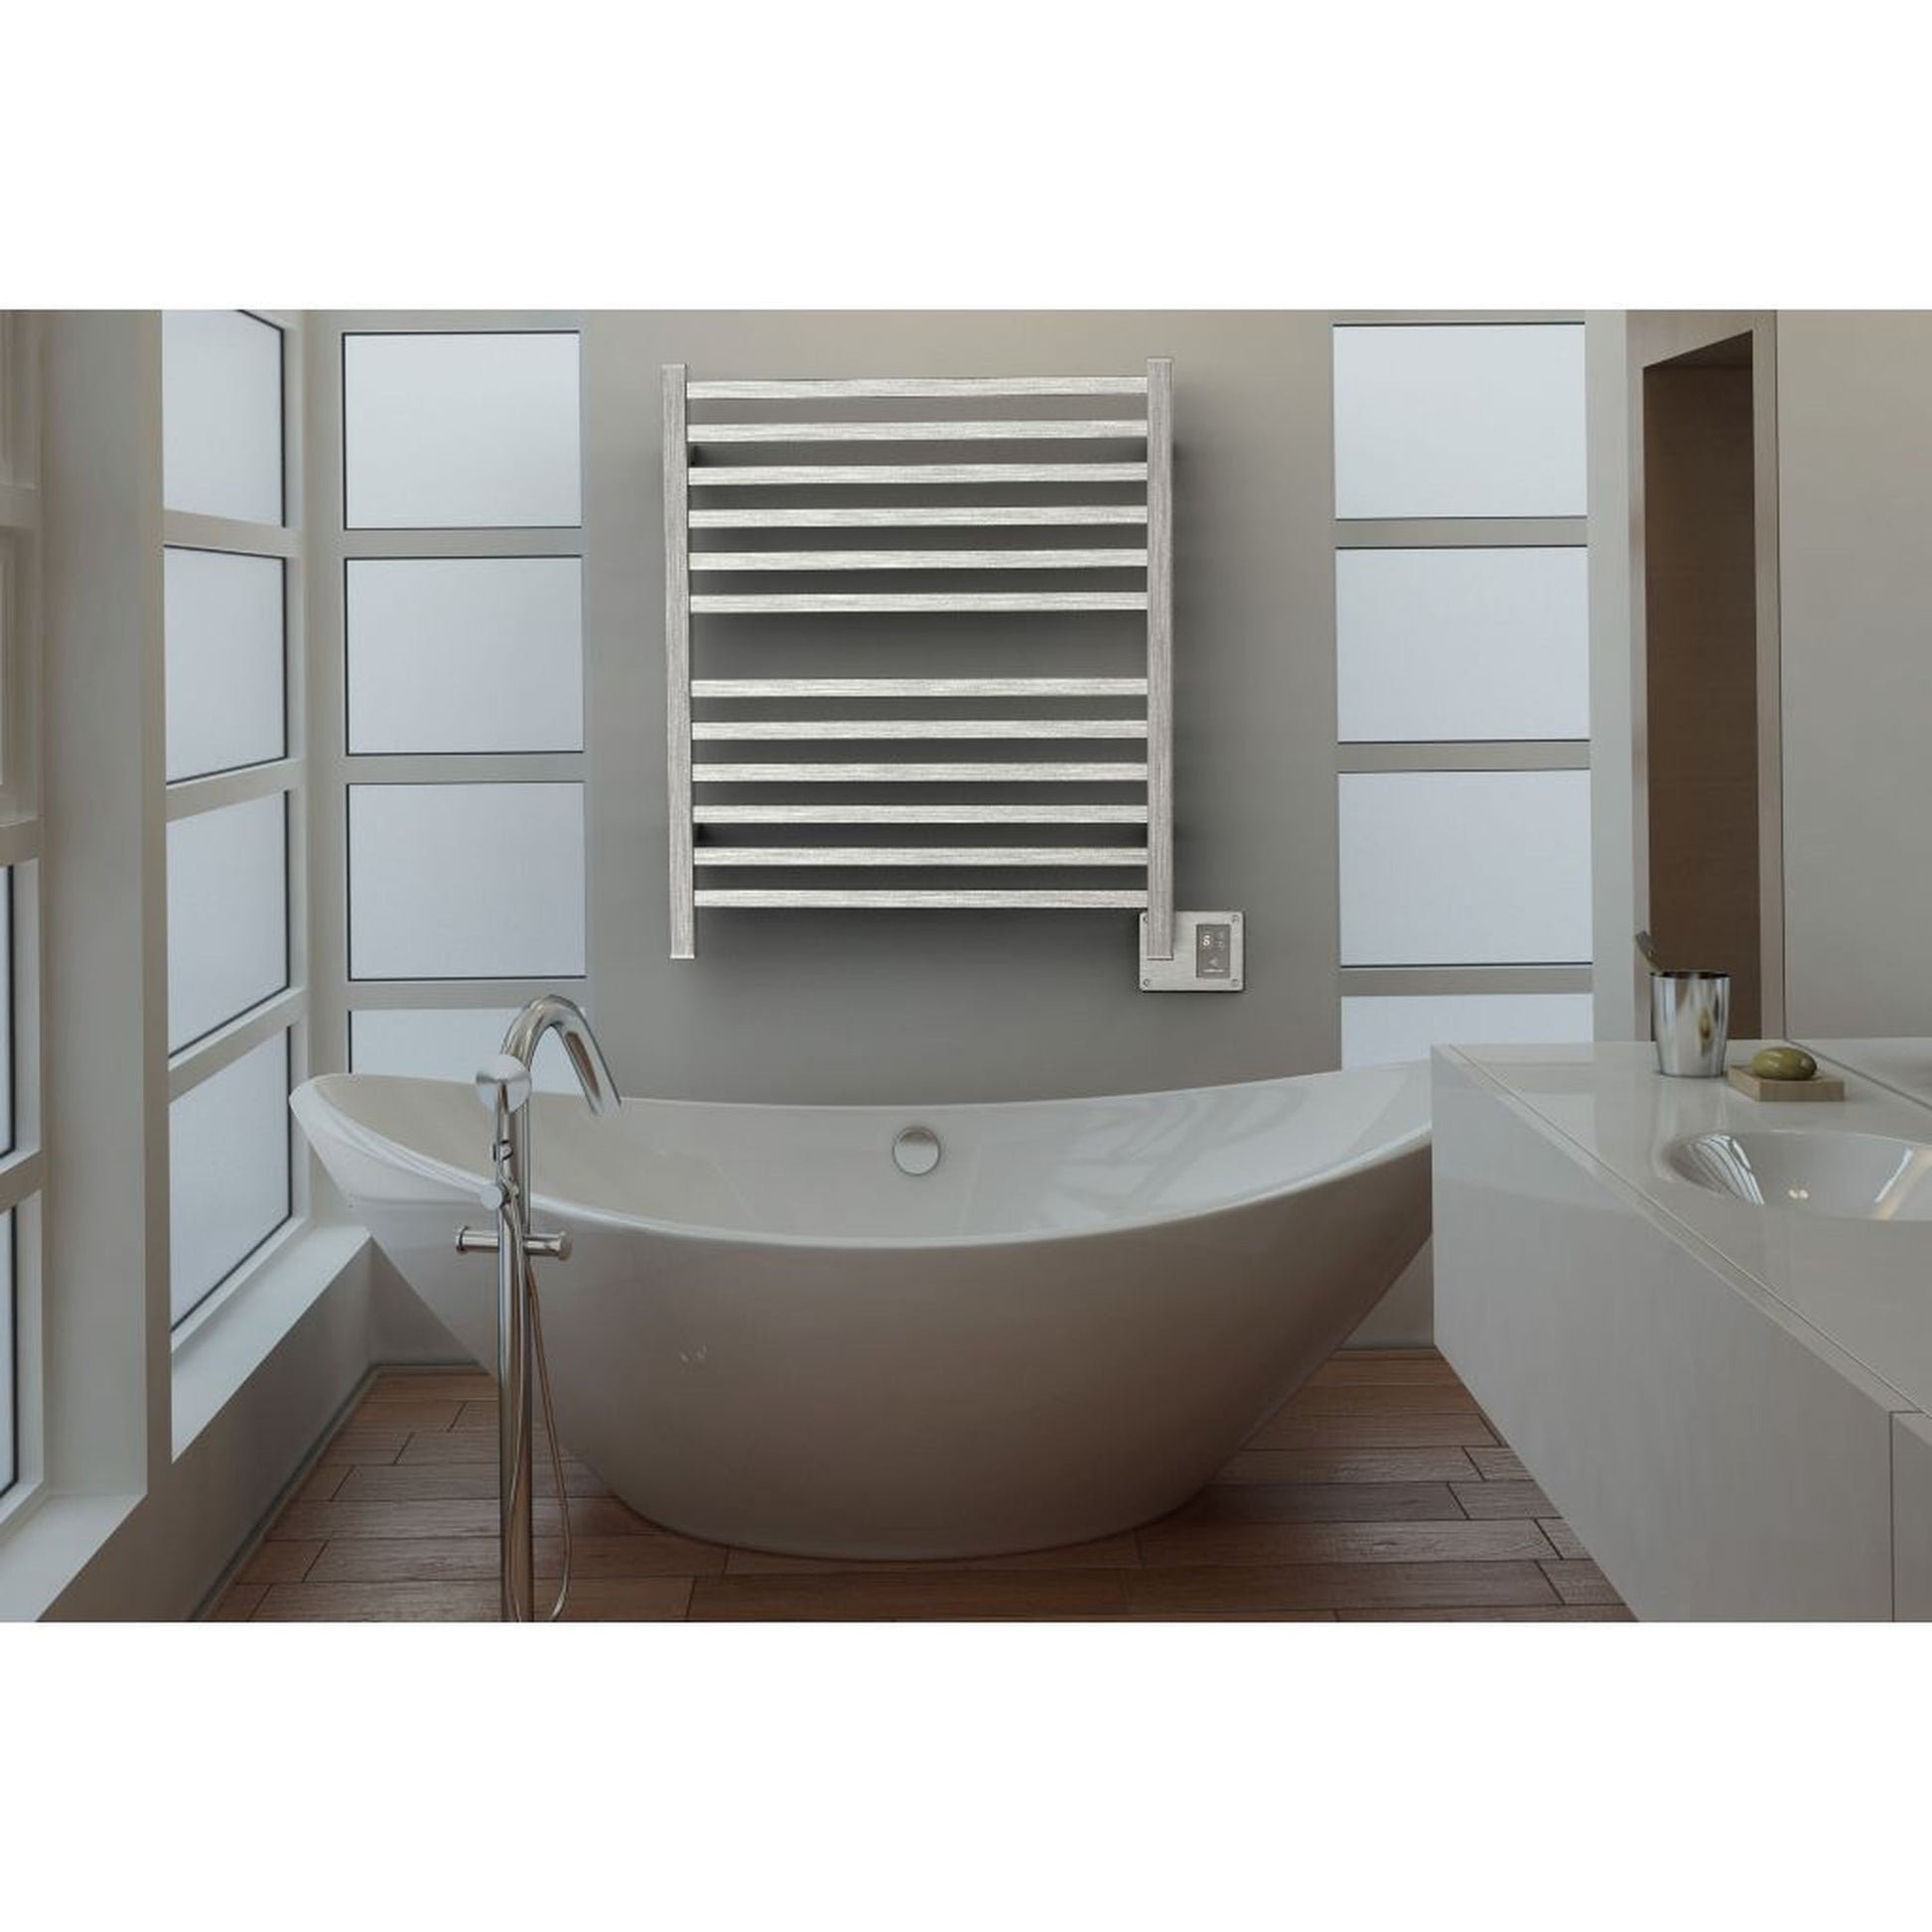 Amba Quadro 28" x 33" 12-Bar Brushed Stainless Steel Hardwired Towel Warmer With Digital Heat Controller